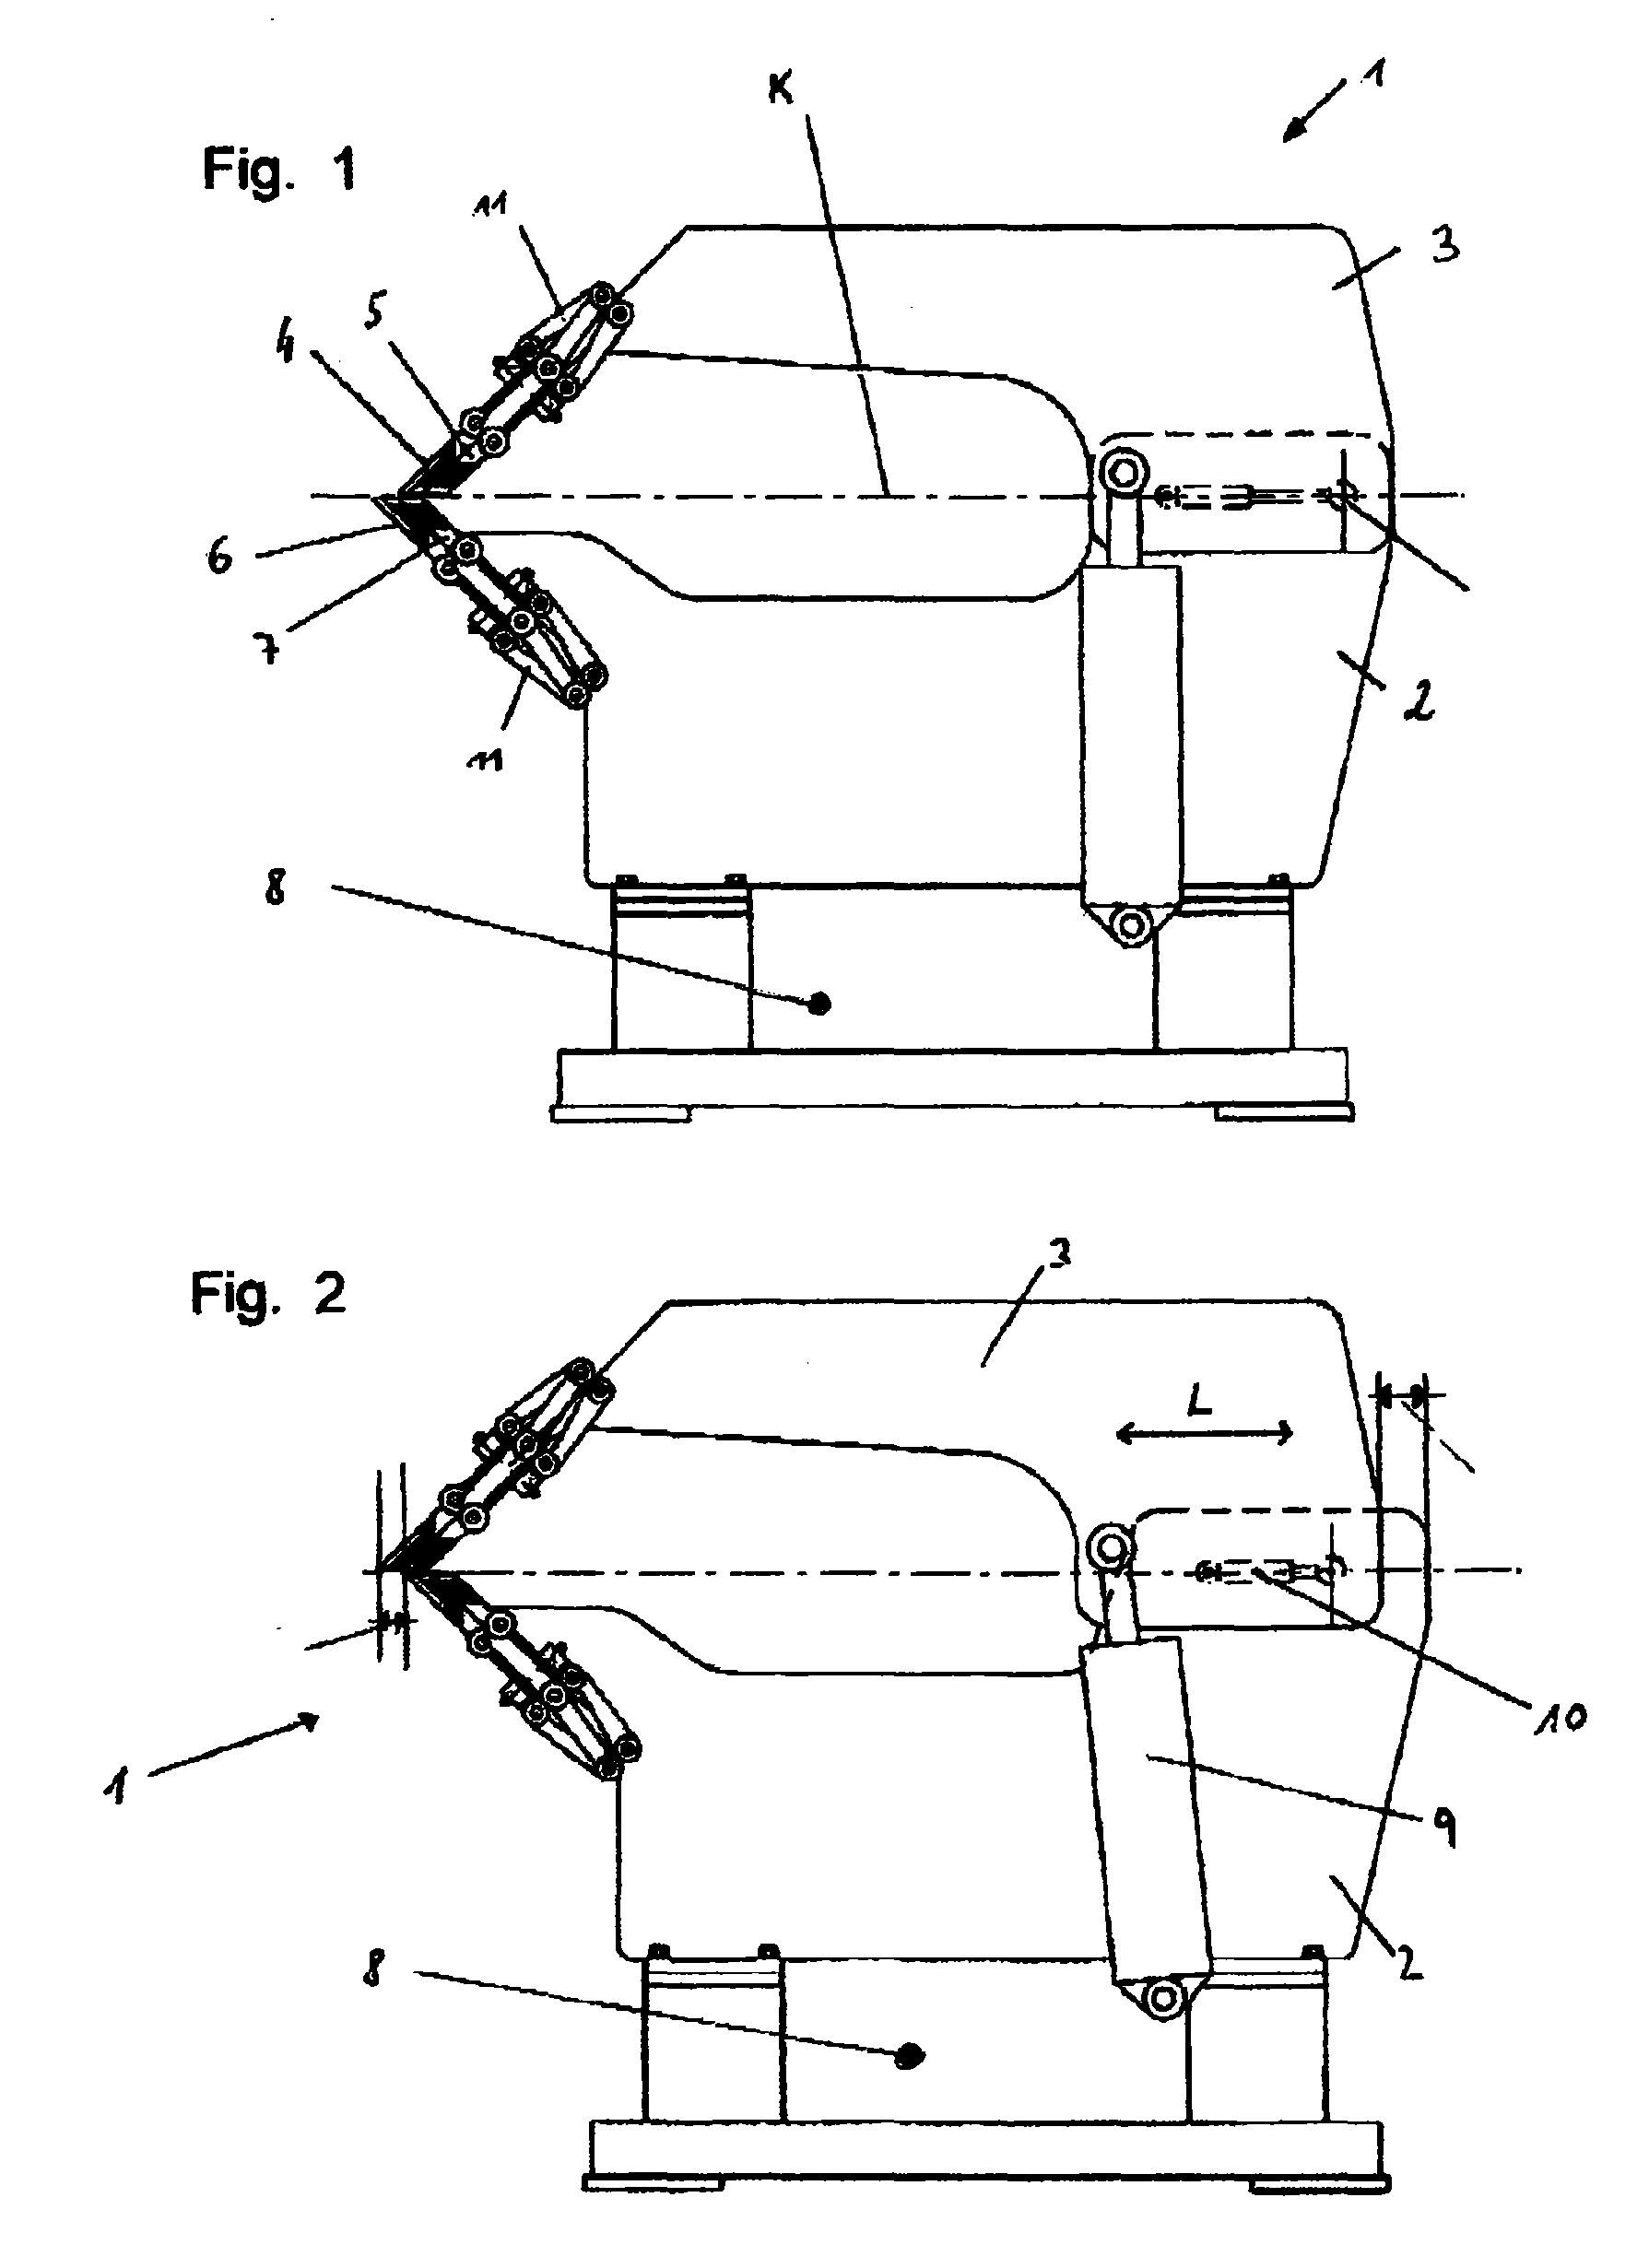 Sheet-metal bending machine, preferentially hydro-powered machine, and a method of its operation